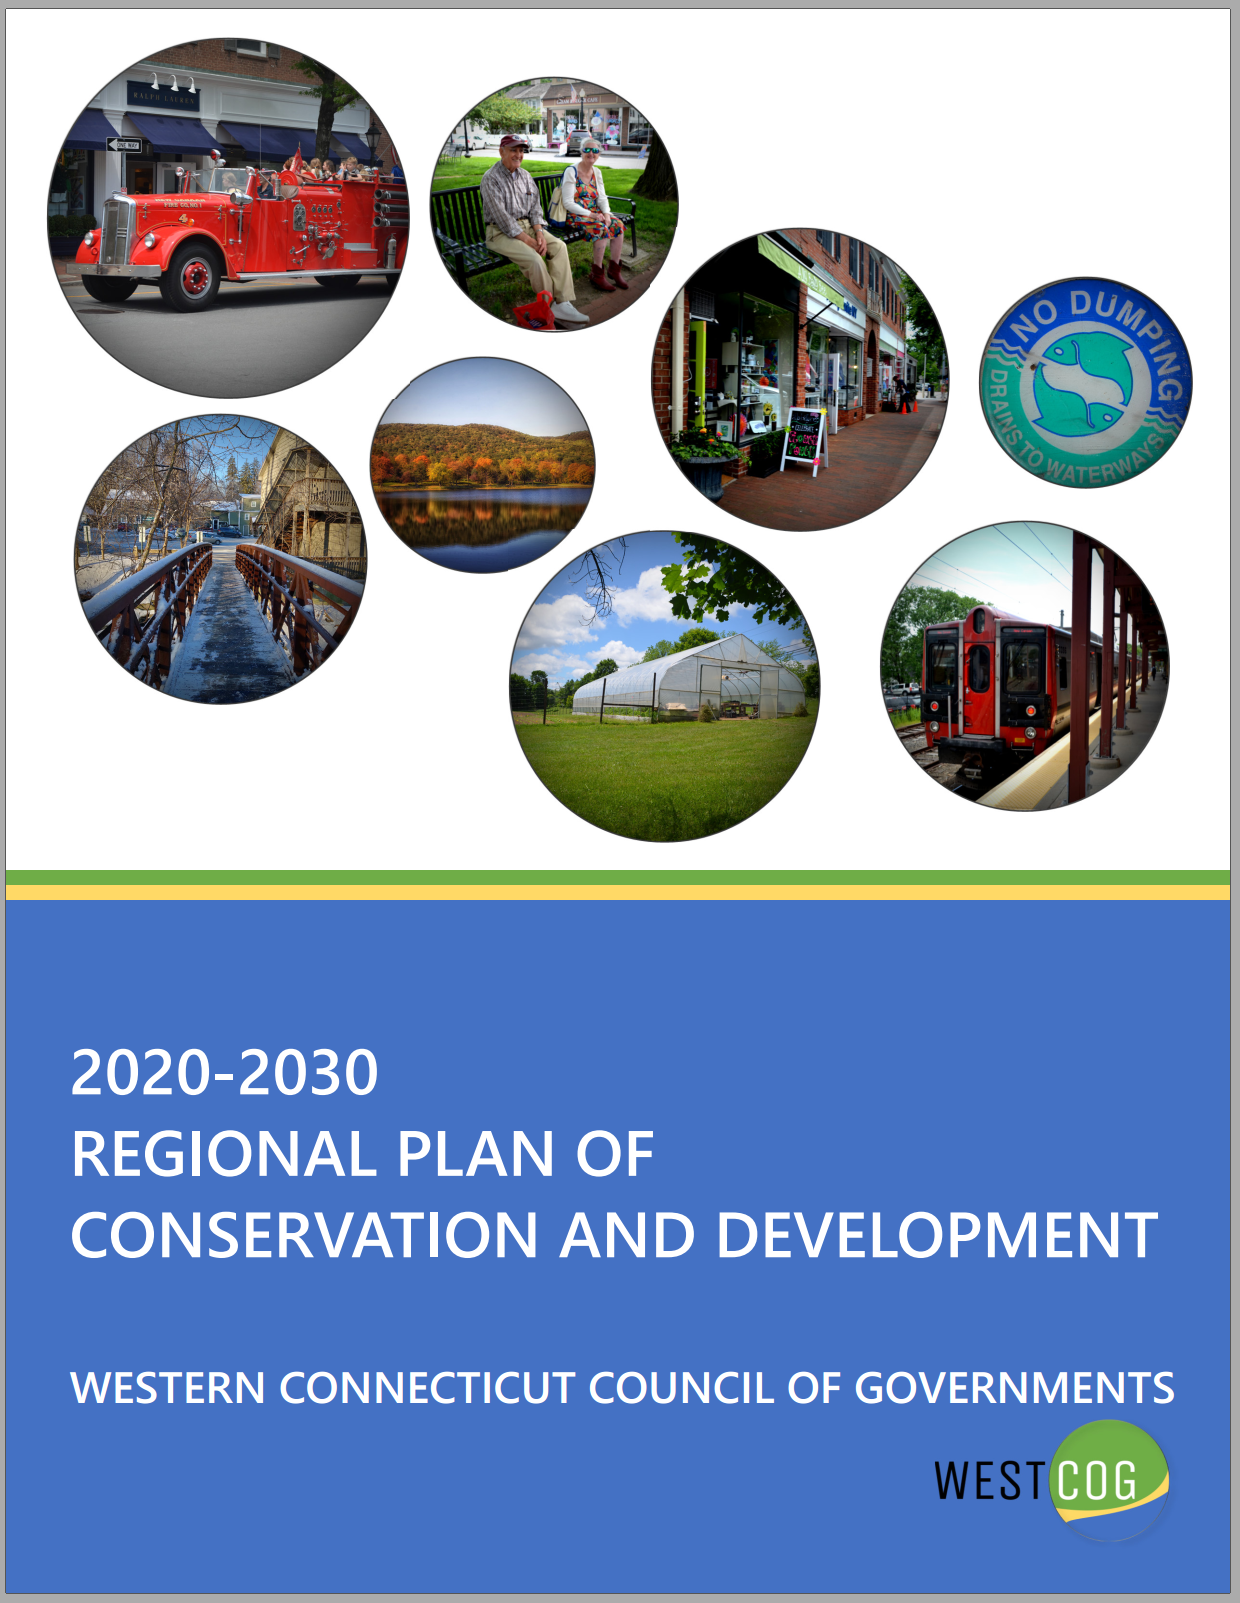 PUBLIC COMMENT REQUESTED FOR 2020-2030 WESTERN CONNECTICUT POCD